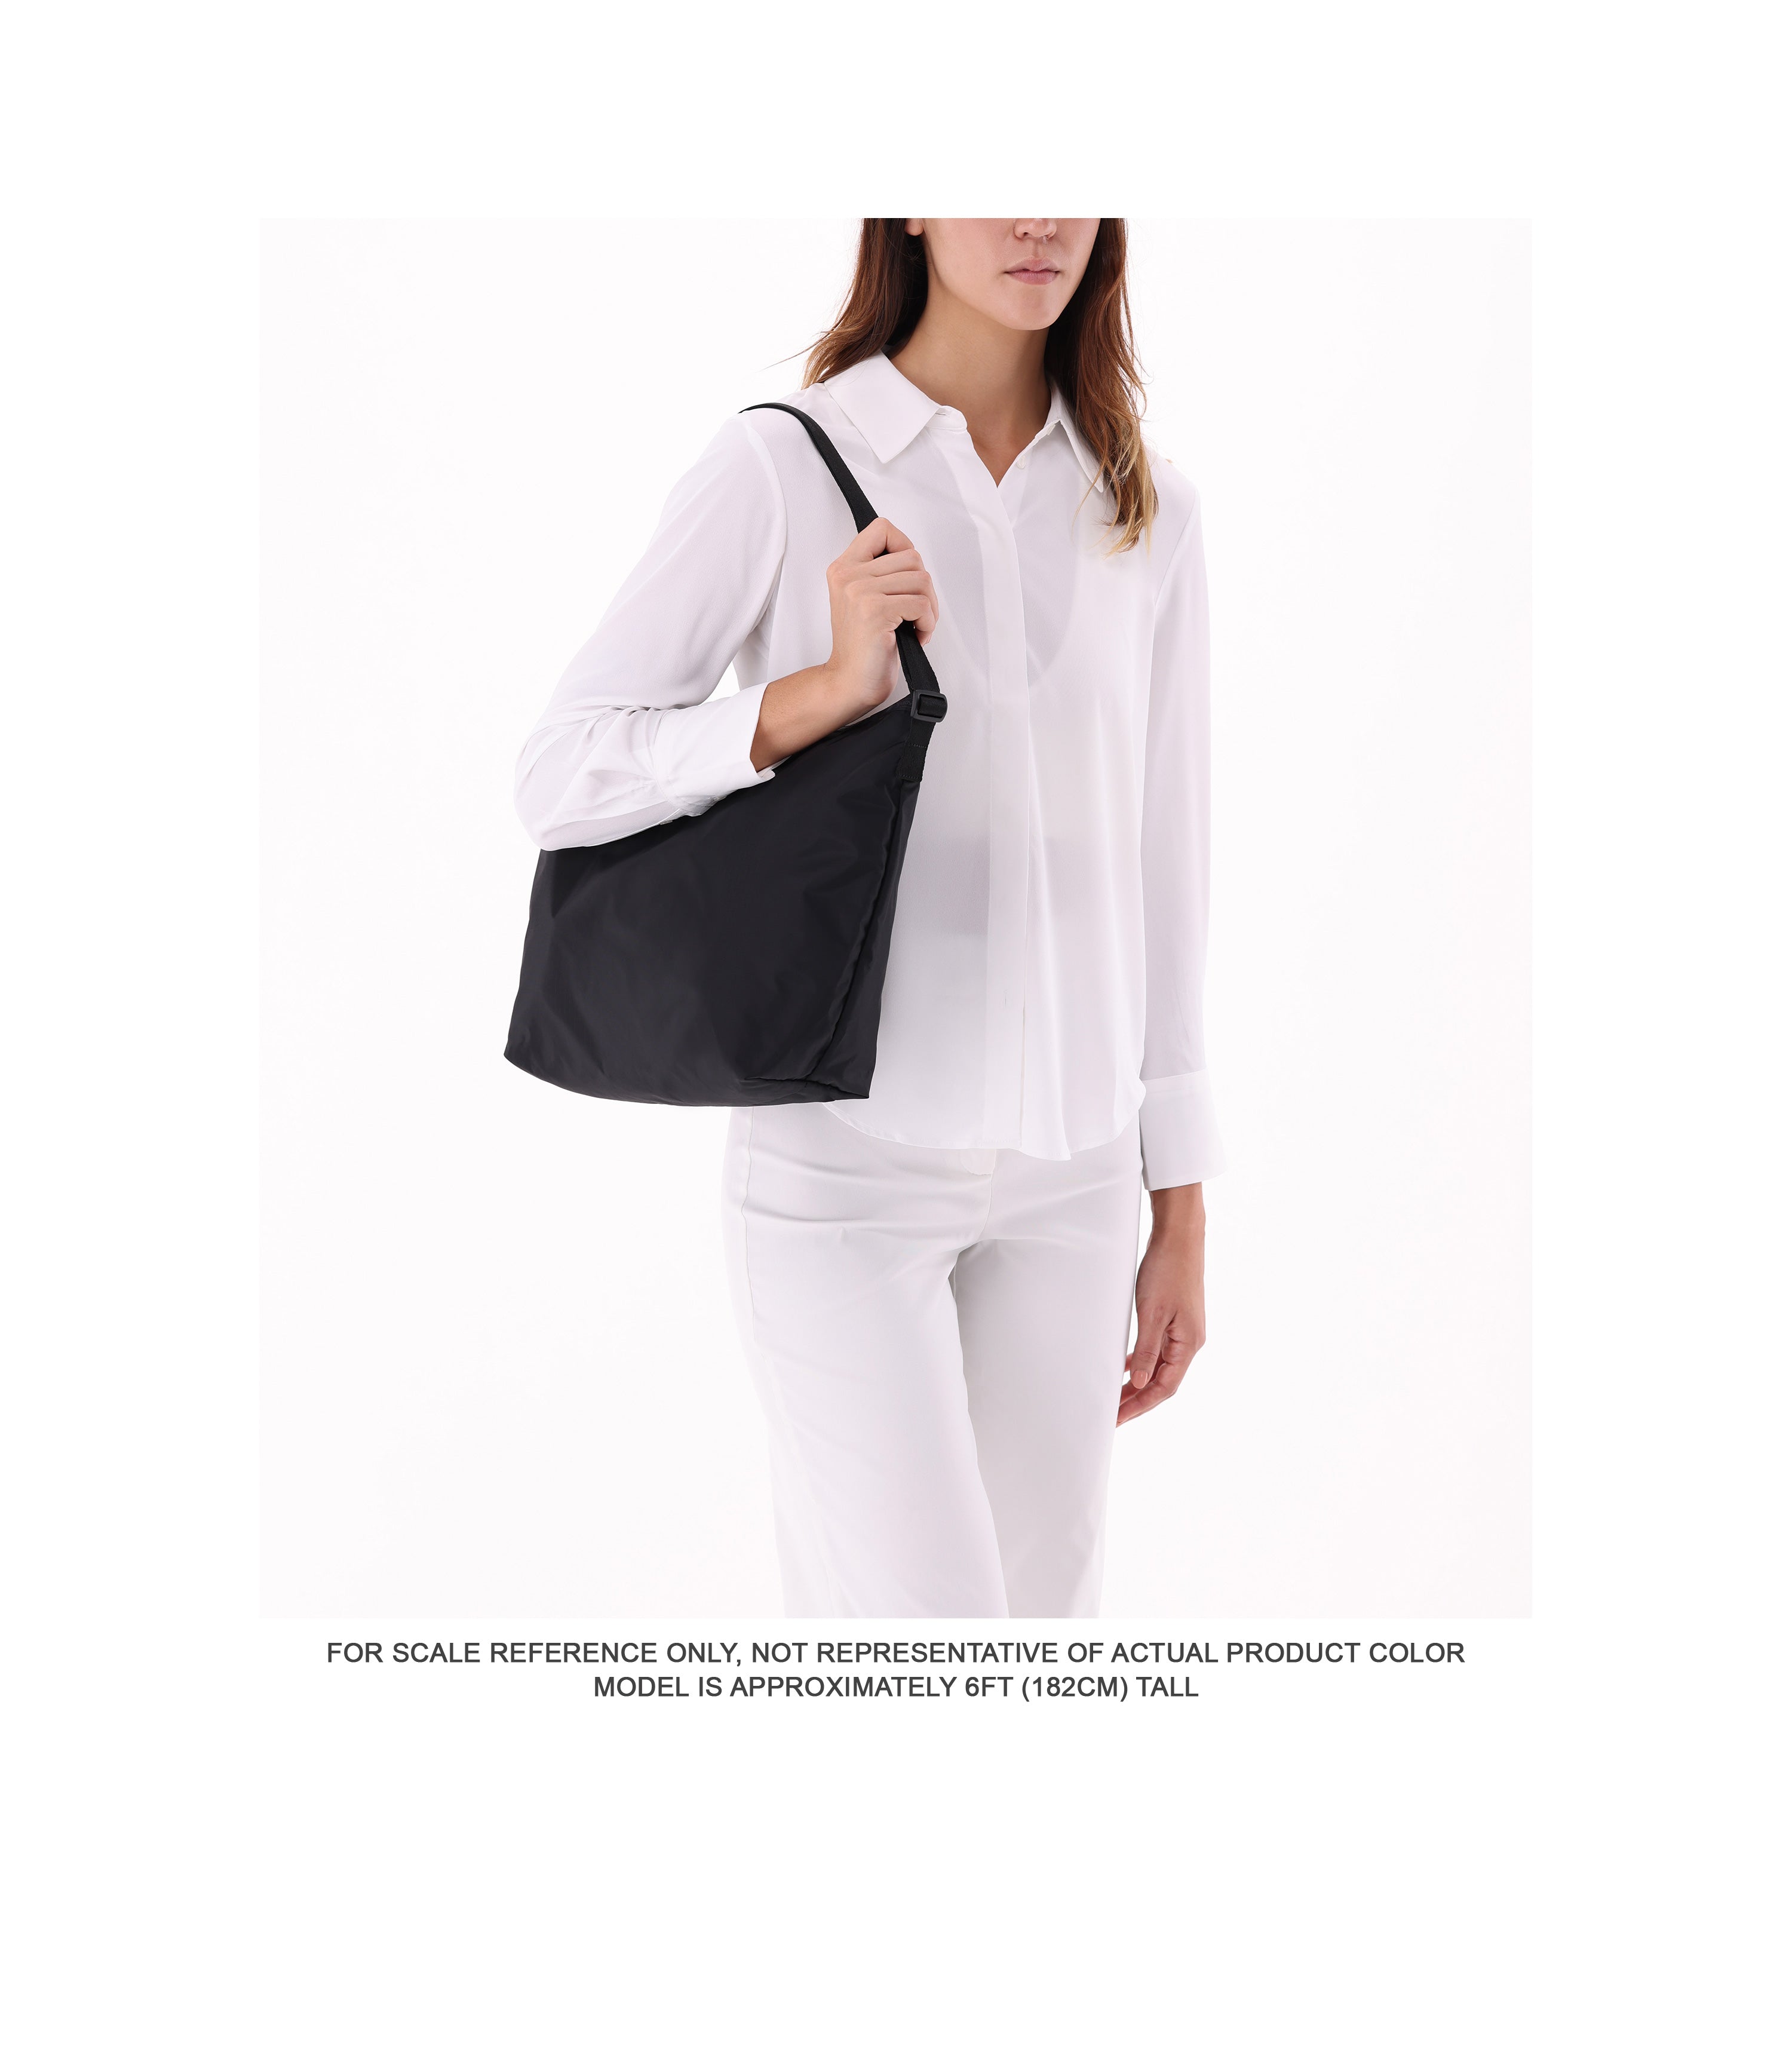 Deluxe Easy Carry Tote